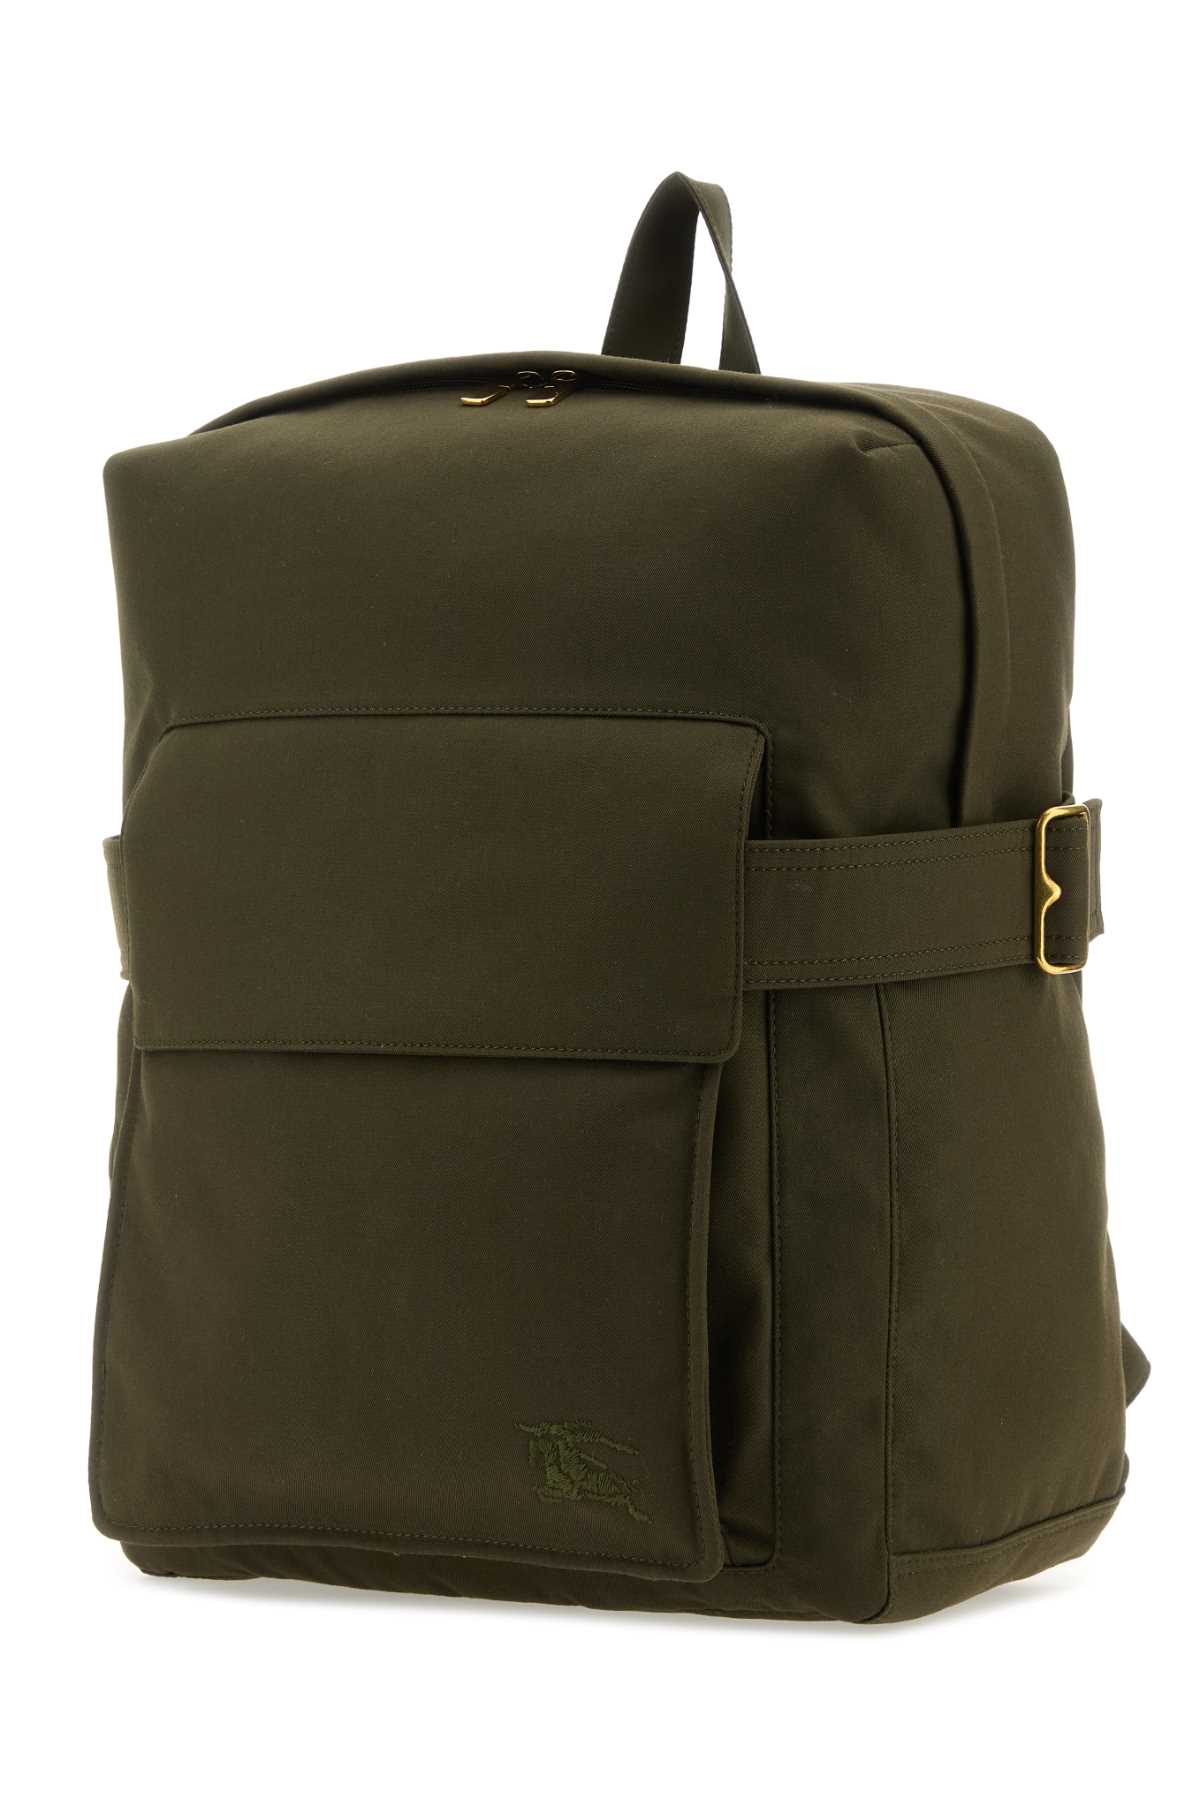 BURBERRY ARMY GREEN POLYESTER BLEND TRENCH BACKPACK